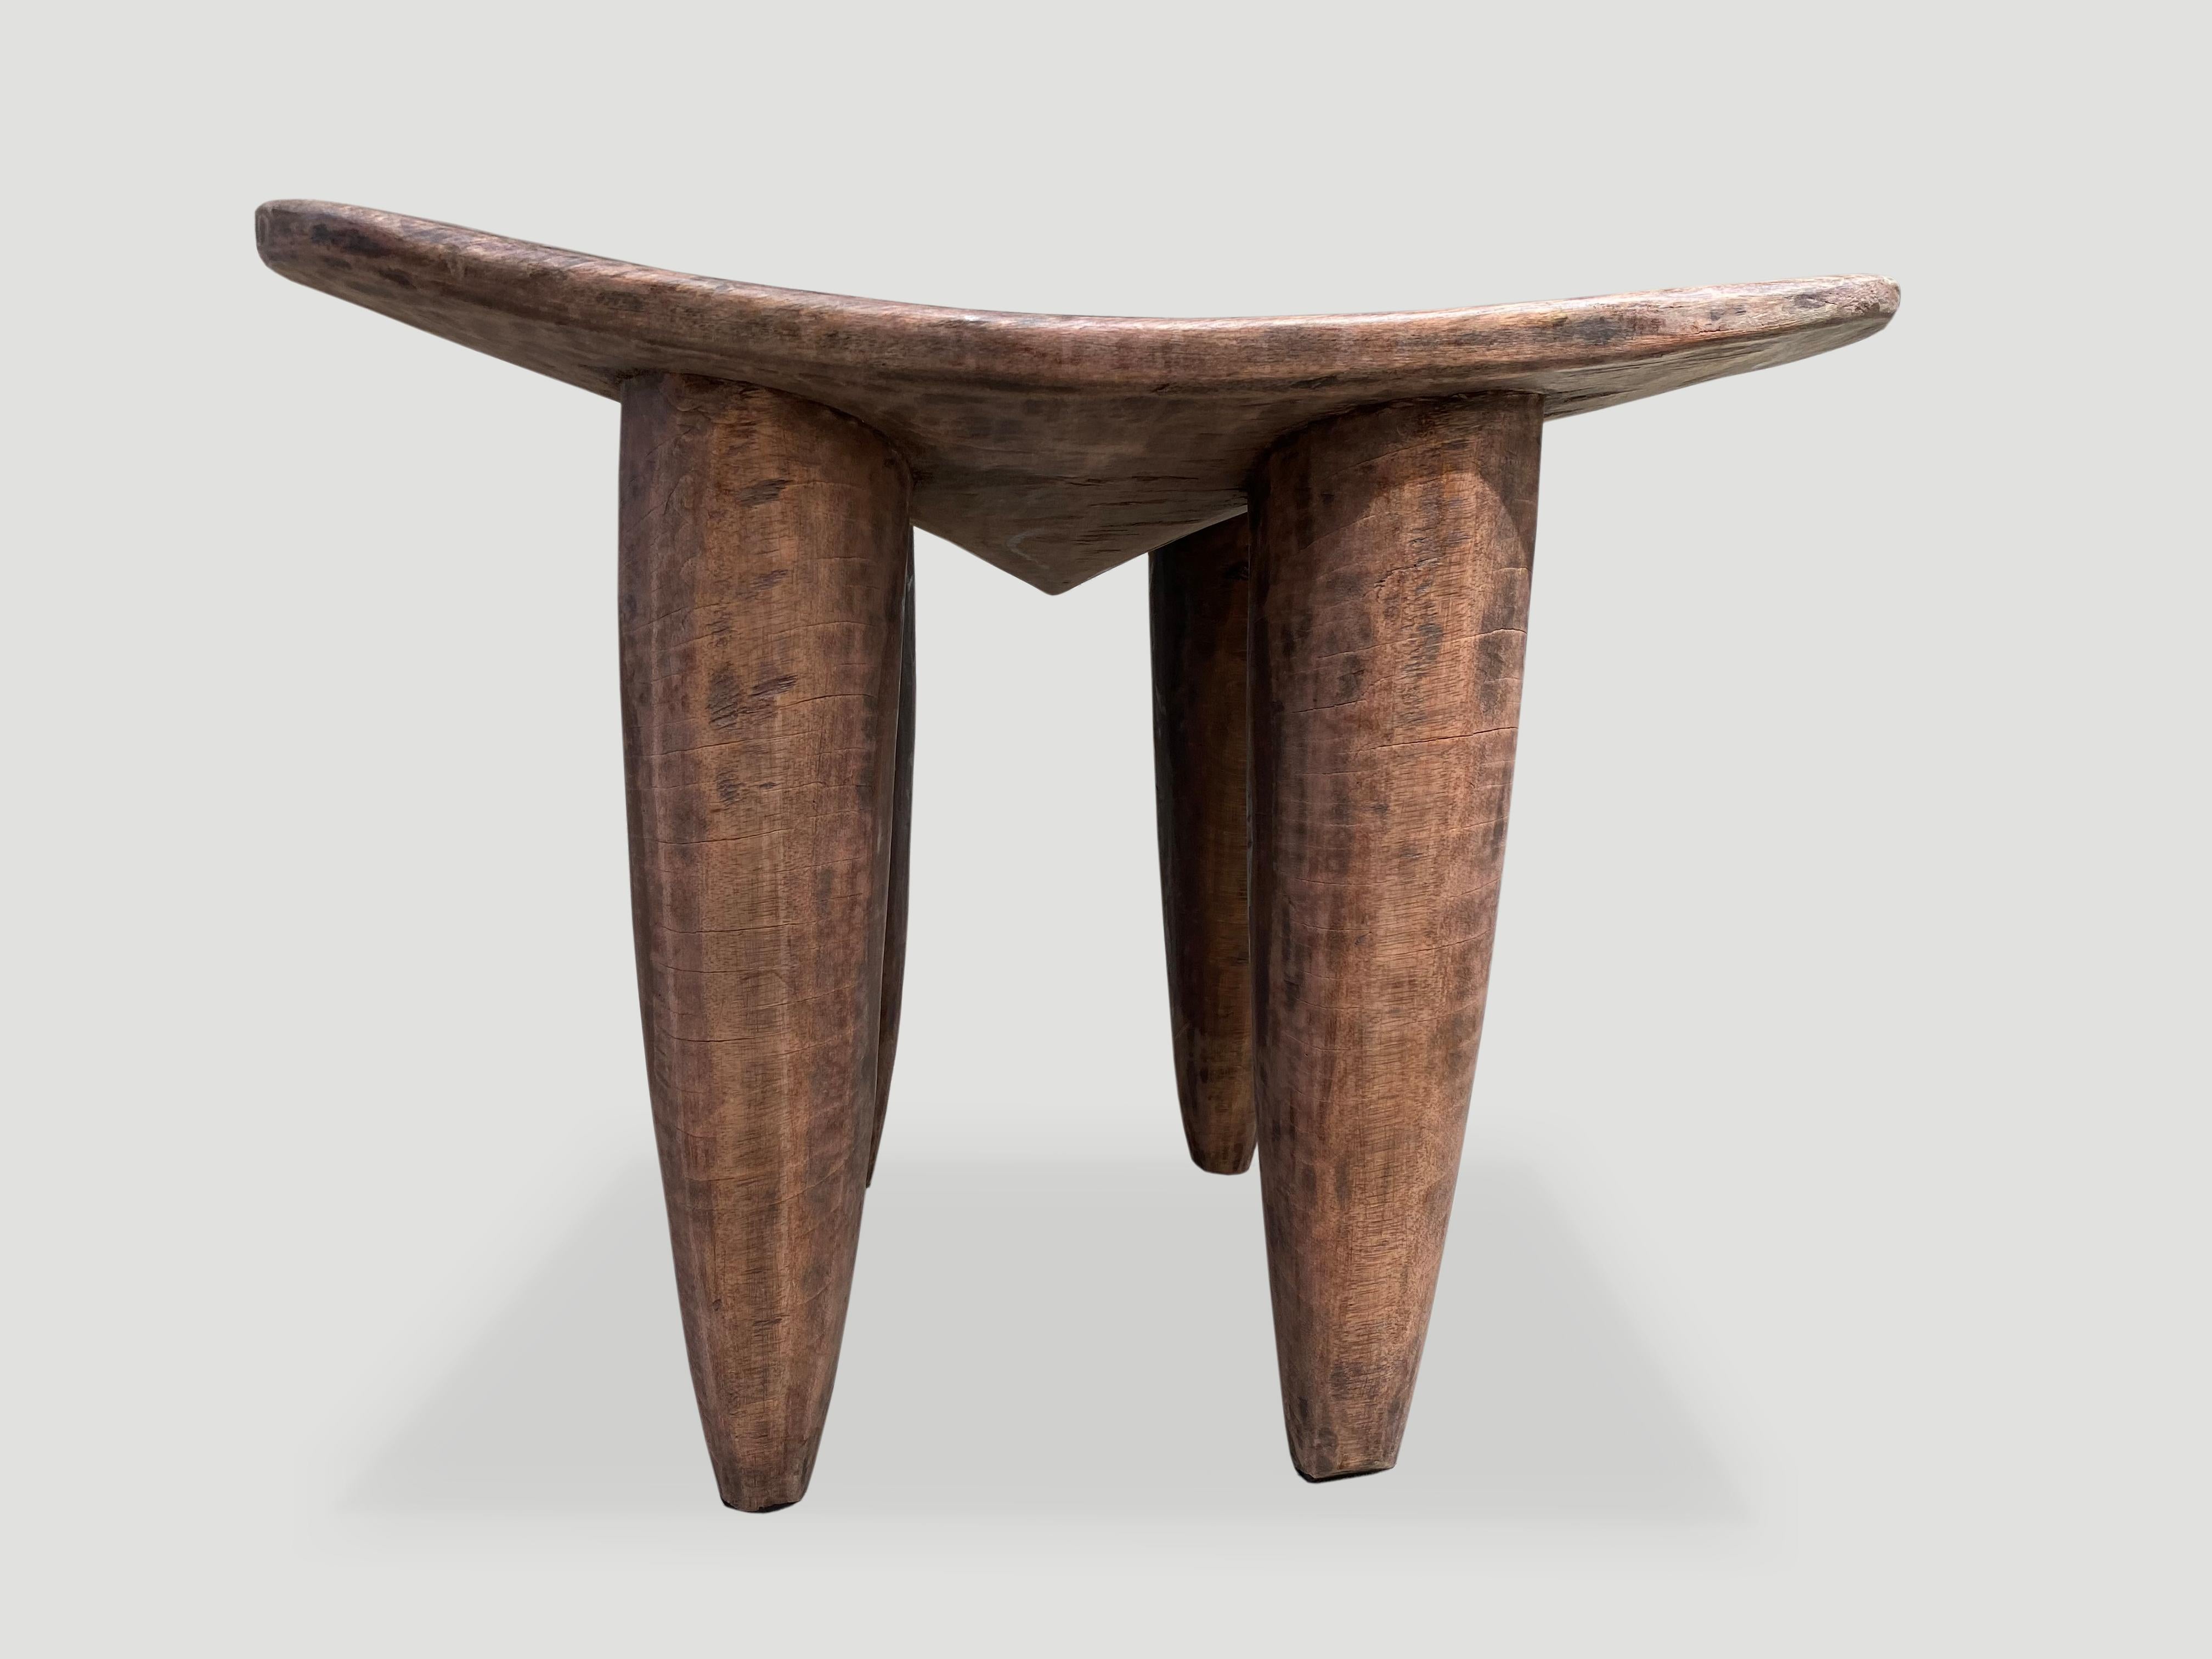 Beautiful antique side table, stool or bench, hand carved from a single block of mahogany wood. Both sculptural and usable. We only source the best. 

This side table or stool was sourced in the spirit of wabi-sabi, a Japanese philosophy that